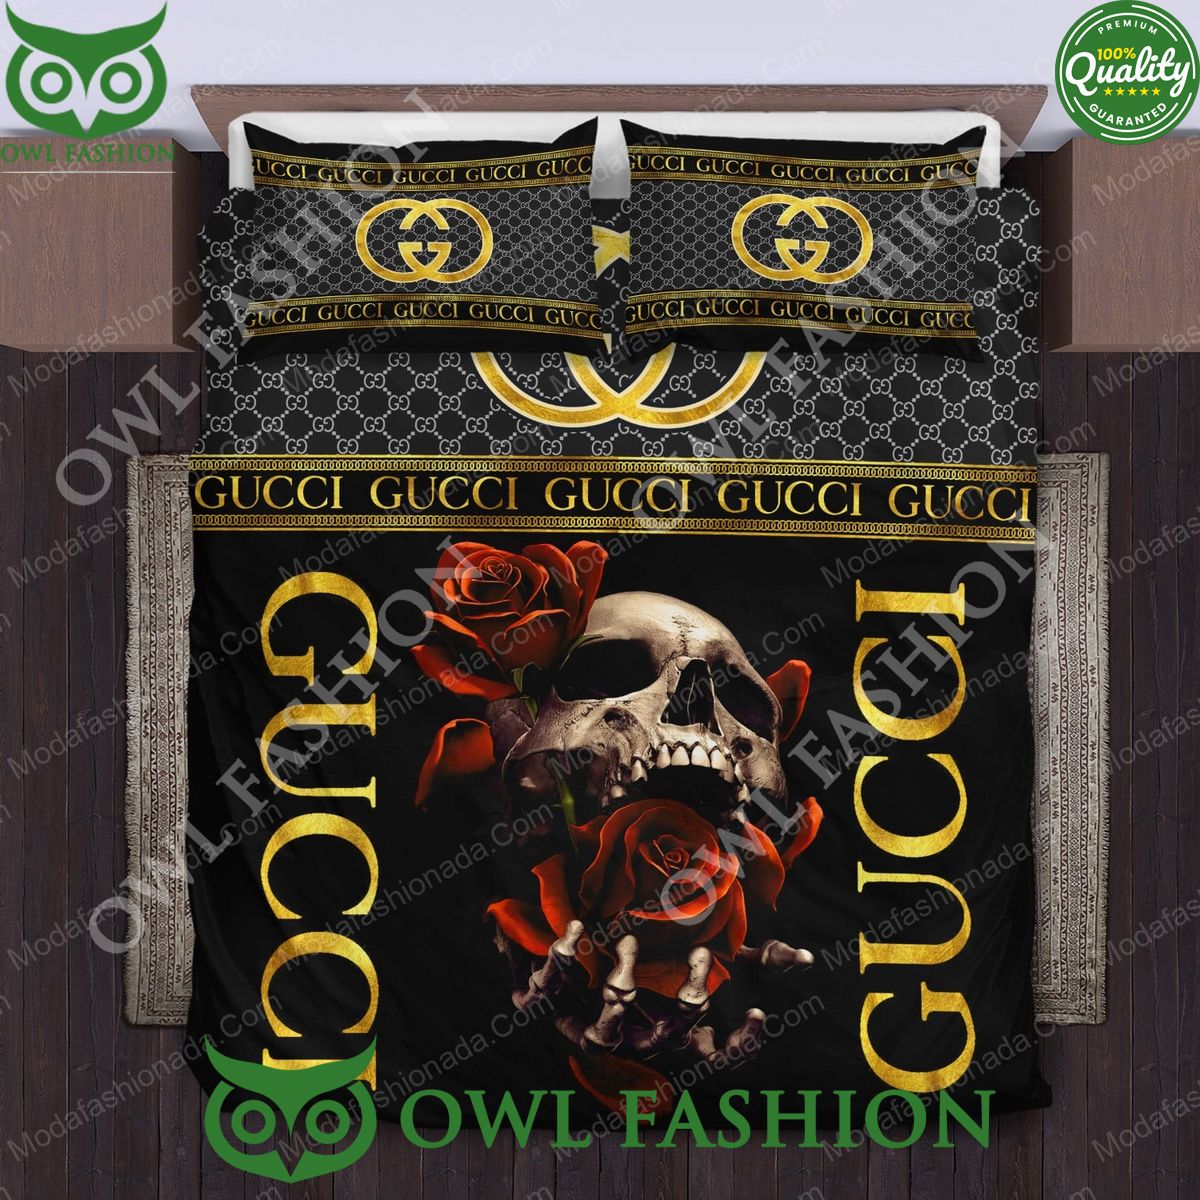 Gucci Skull And Roses Bedding Sets - Owl Fashion Shop